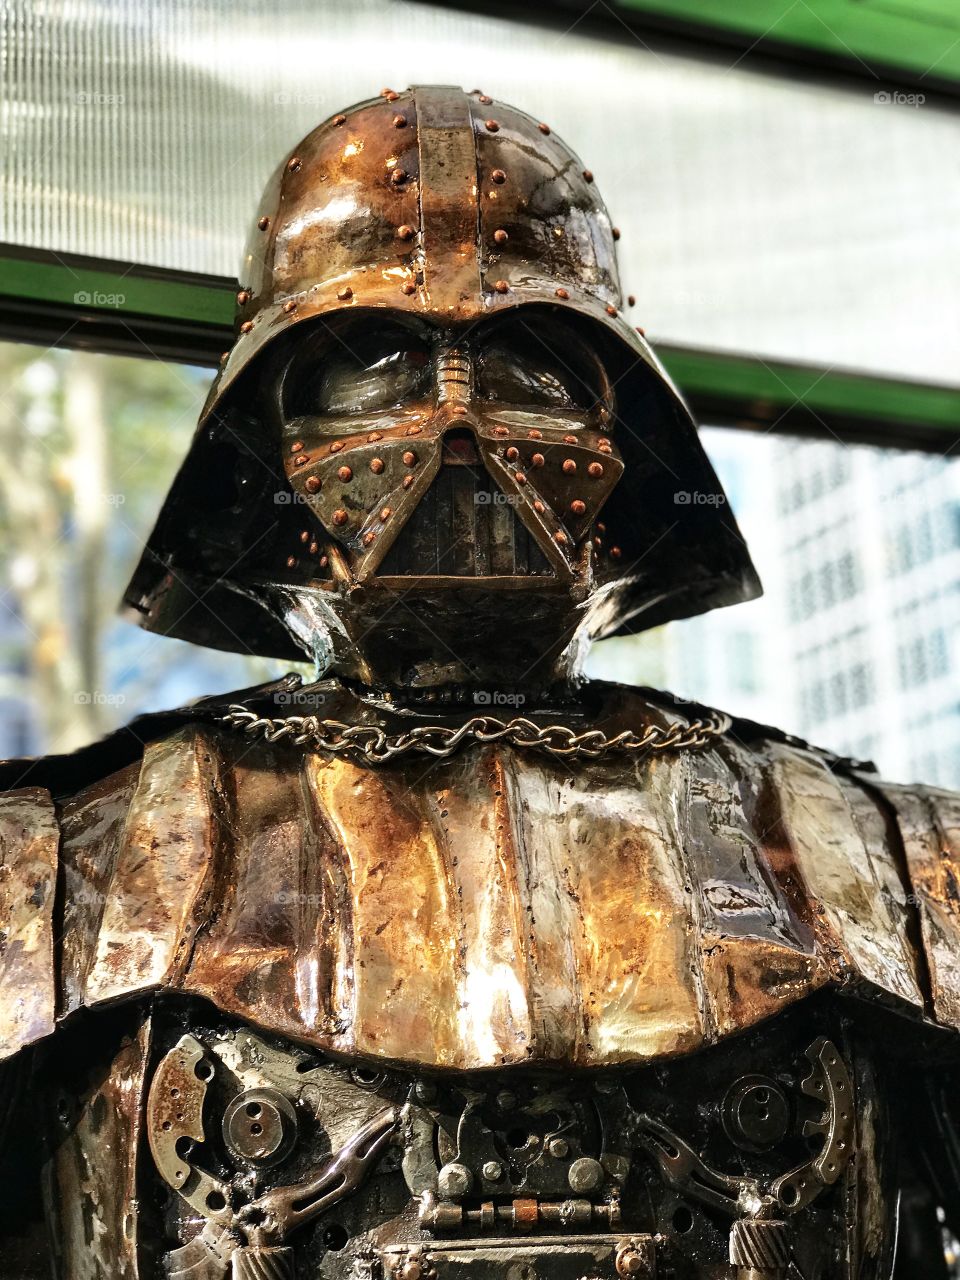 Darth Vader made out of metal in Bryant Park. 